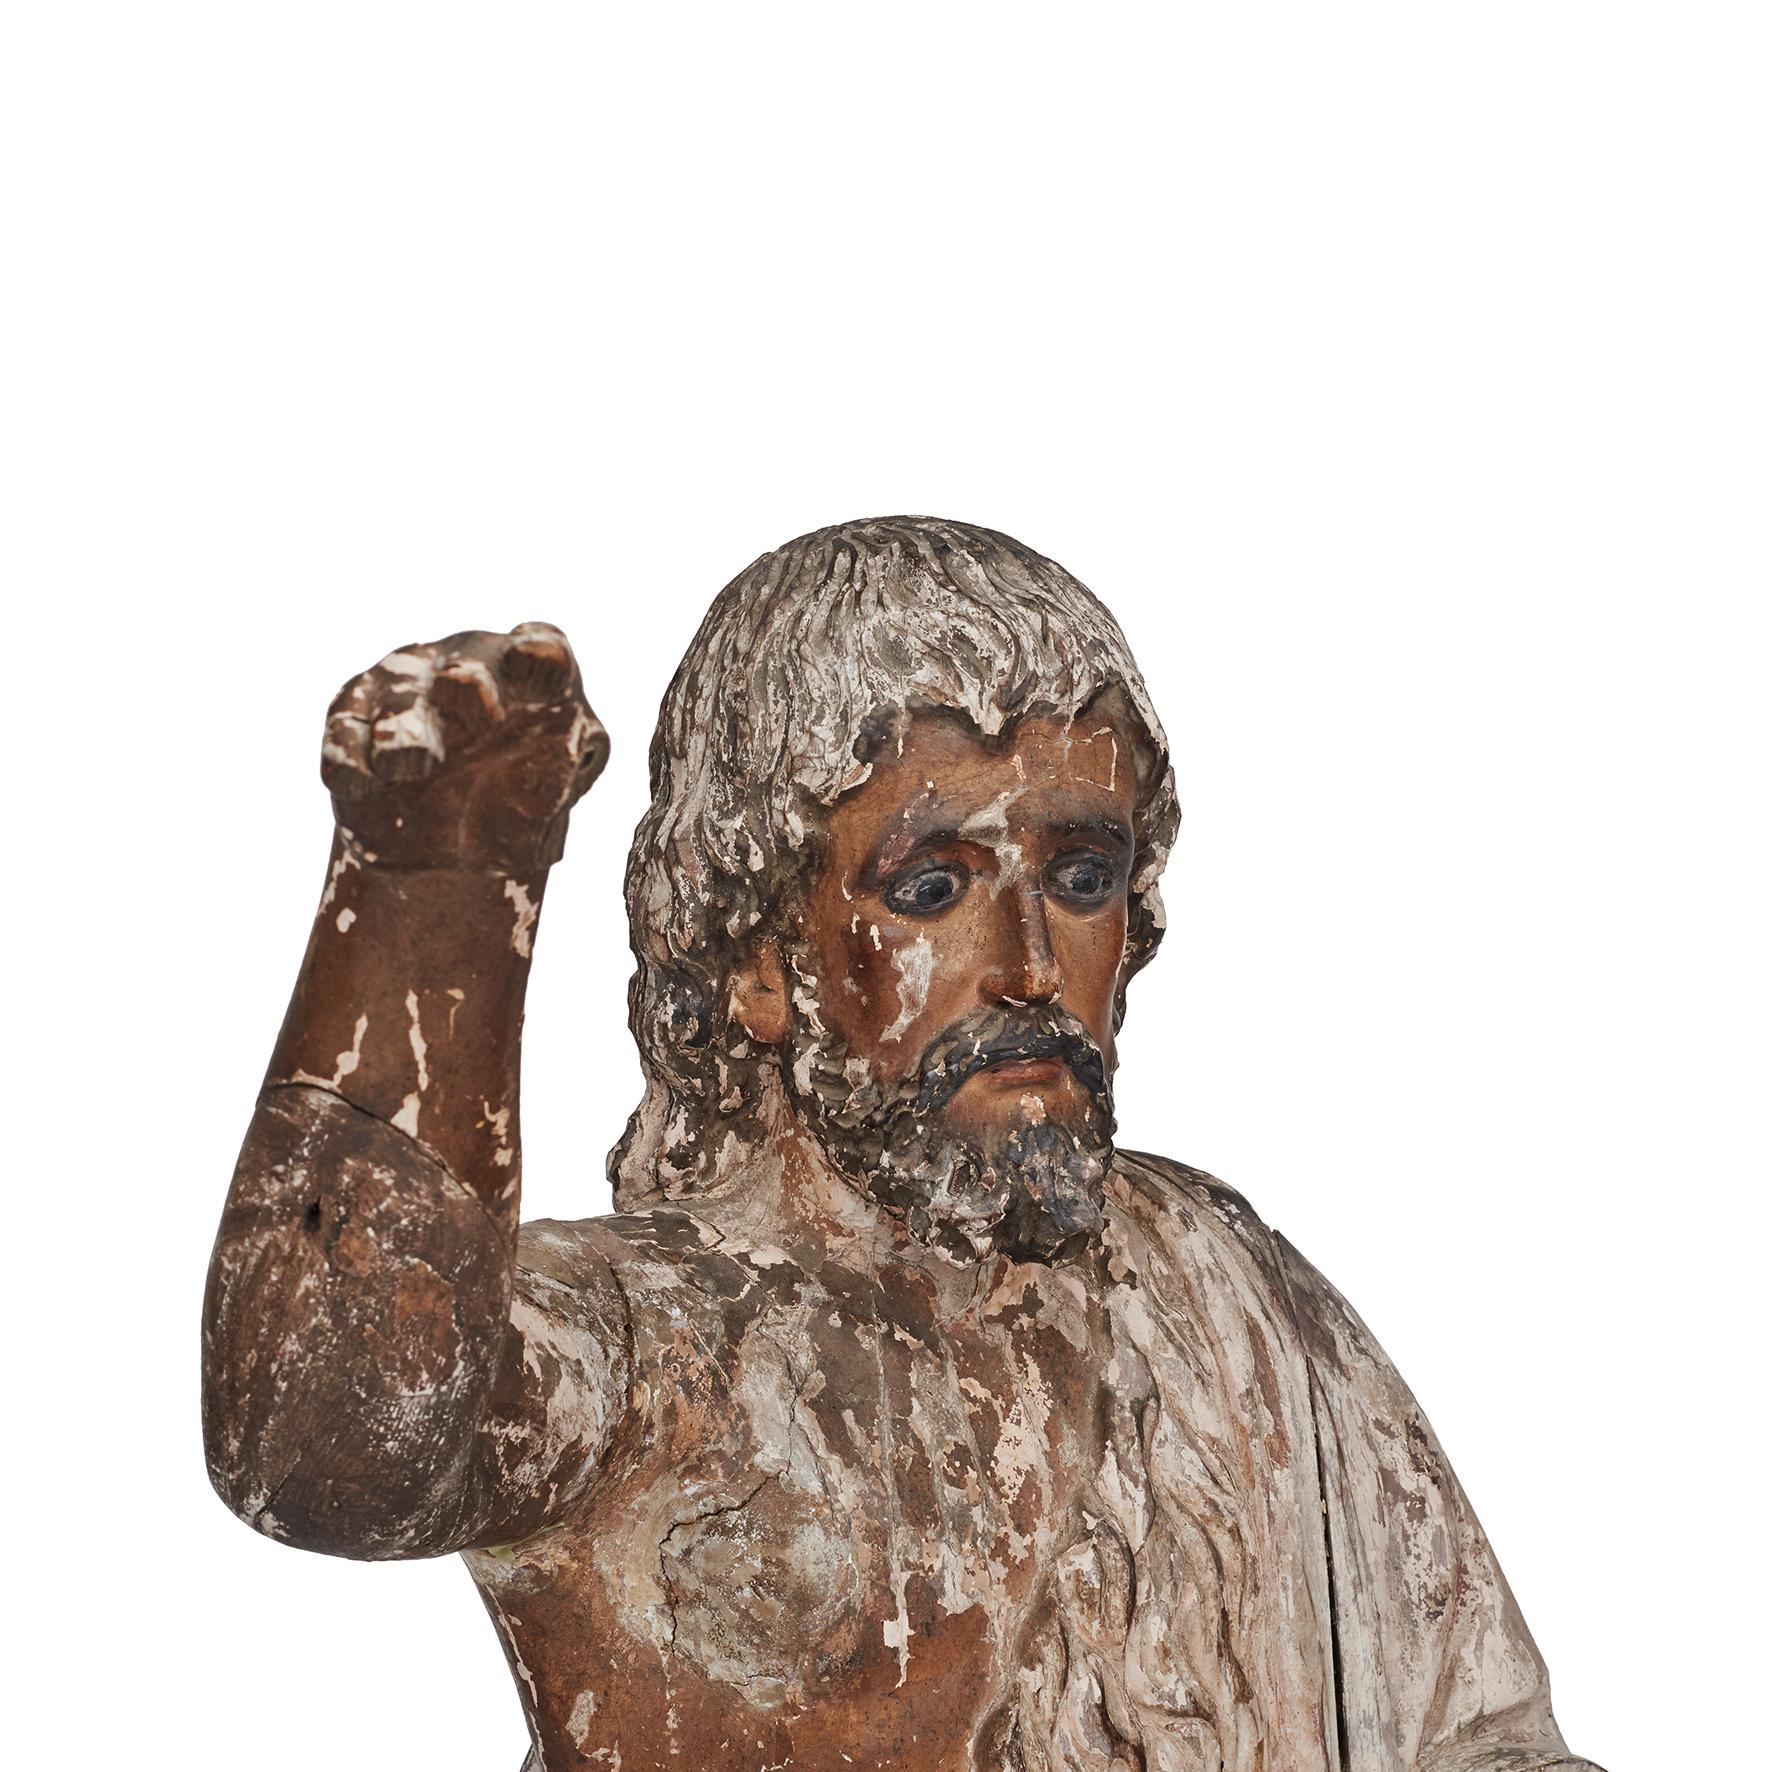 A wood carved baroque figure depicting John the Baptist (also called Johannes the Baptist) with original polychrome paint. Height: 152 cm.
Originates from a Catholic Cathedral in the Philippines, c. 1750-1770.
Hand-carved in Balayong hard wood,